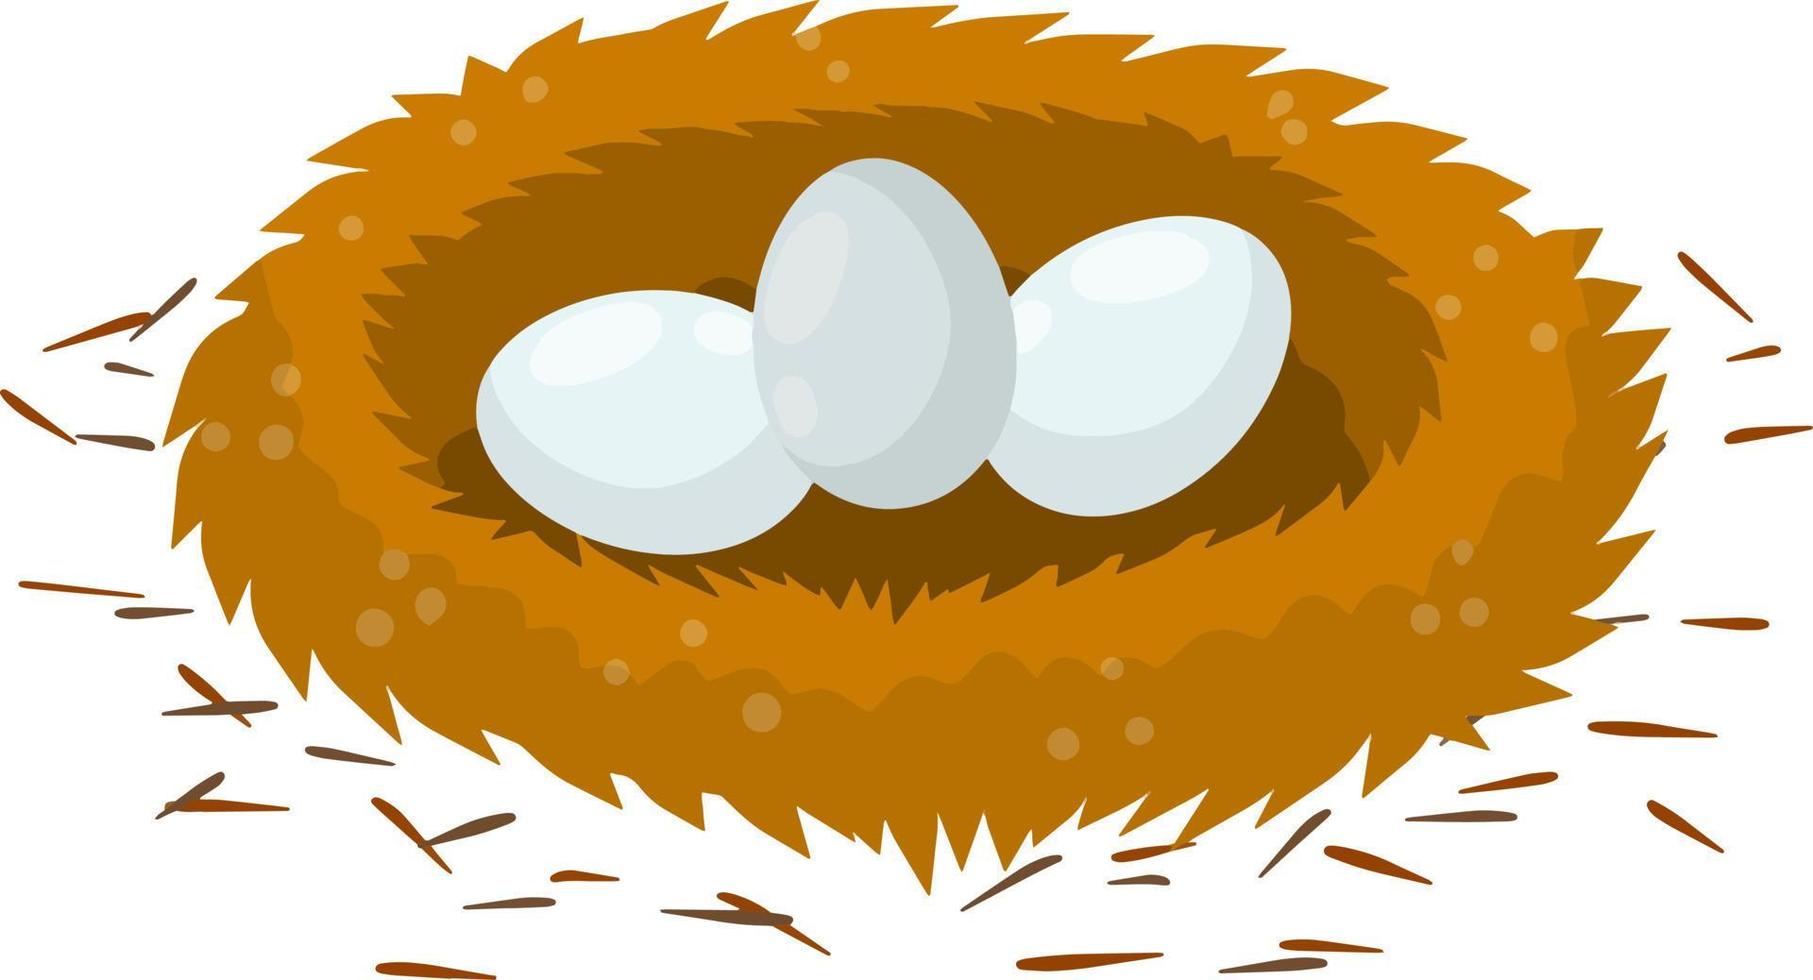 Nest and egg. Place for Chicks. Cartoon flat illustration. element of nature and forests. Wildlife. Bird house vector